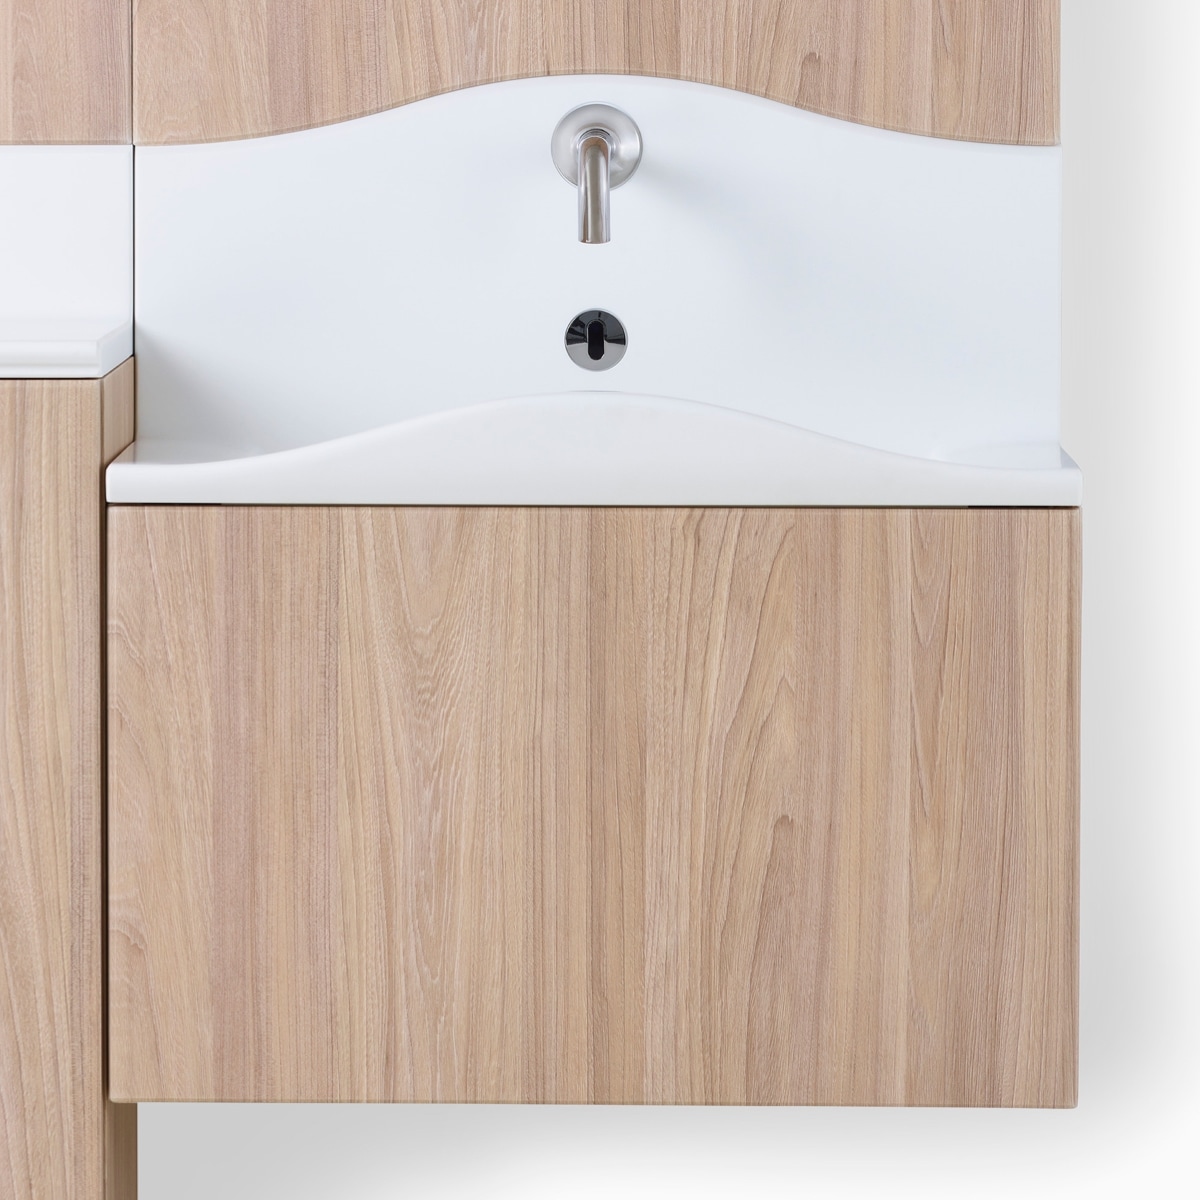 A close-up view of white Corian sink in Compass System in a medium wood finish.